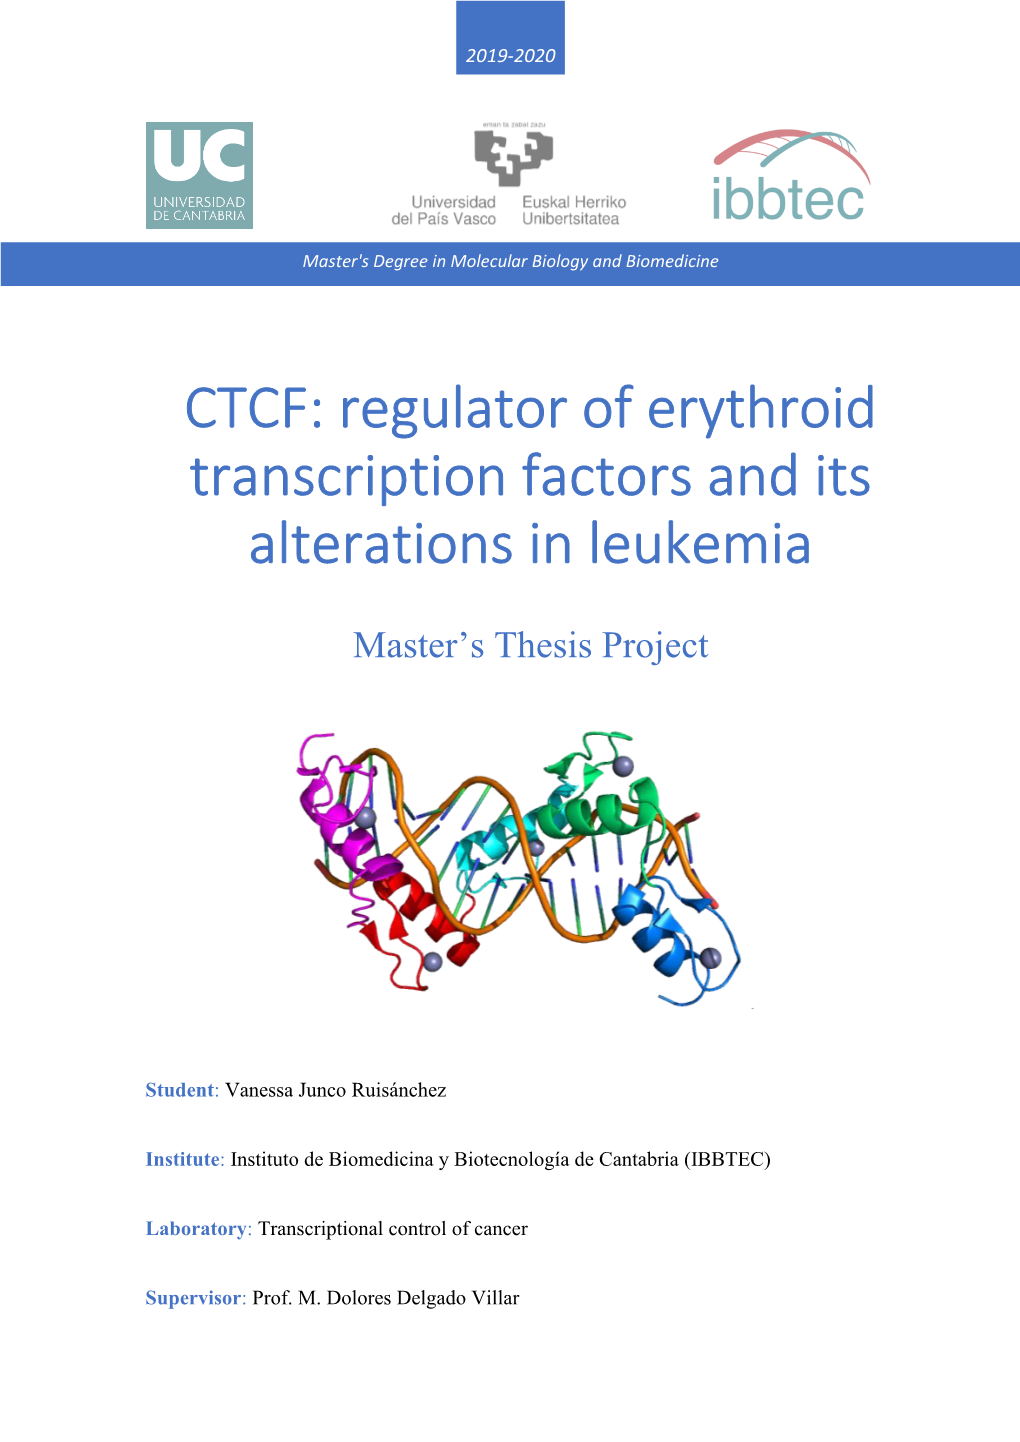 Regulator of Erythroid Transcription Factors and Its Alterations in Leukemia